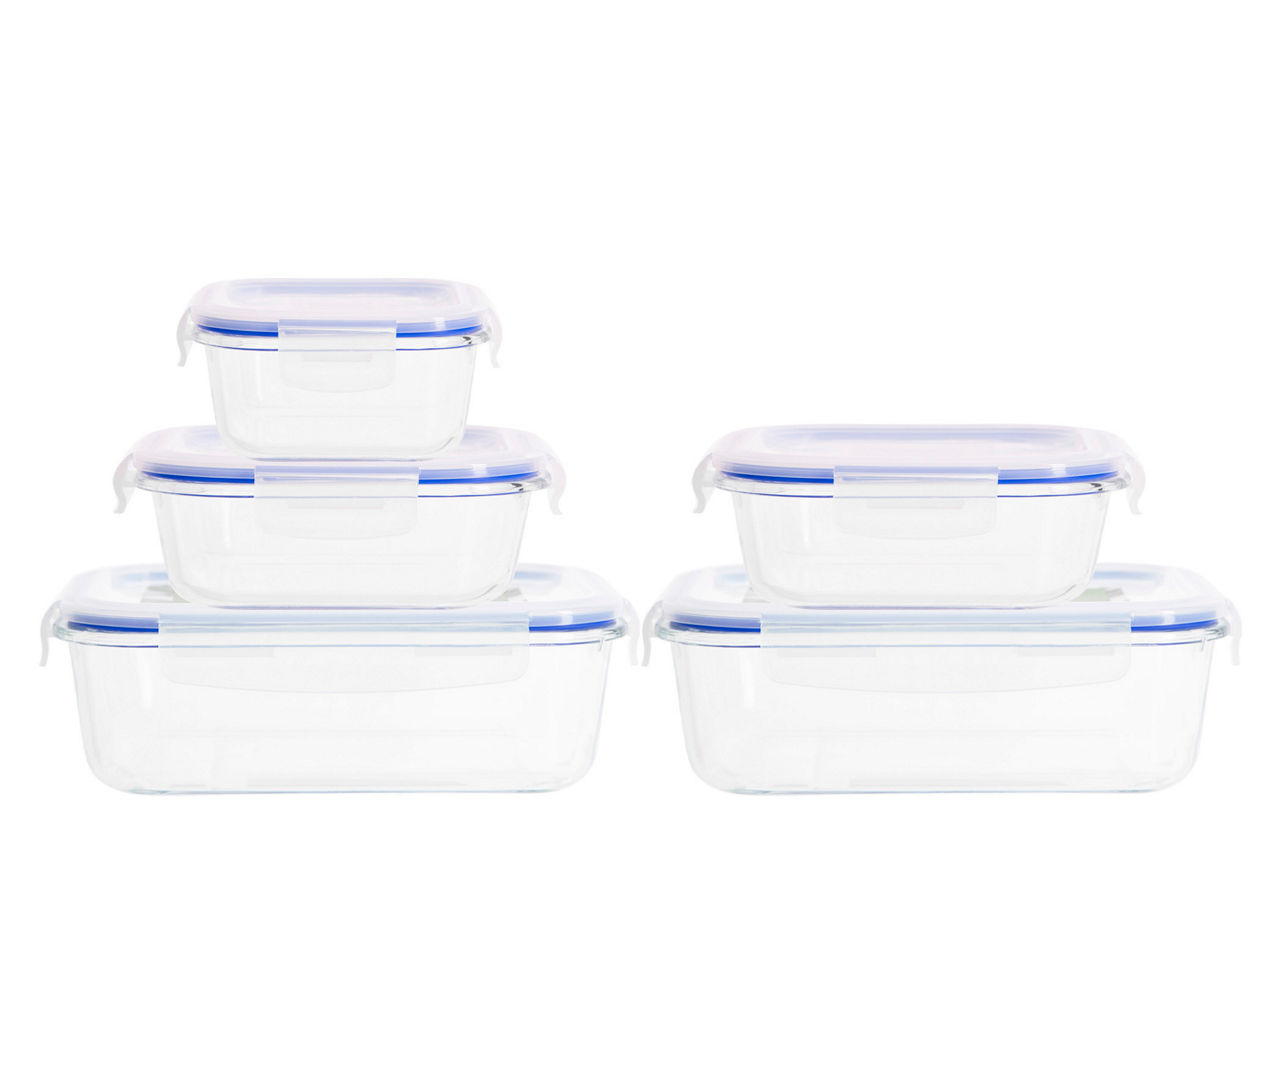 Gourmet Trends Containers, Always Fresh, 10 Piece Value Set